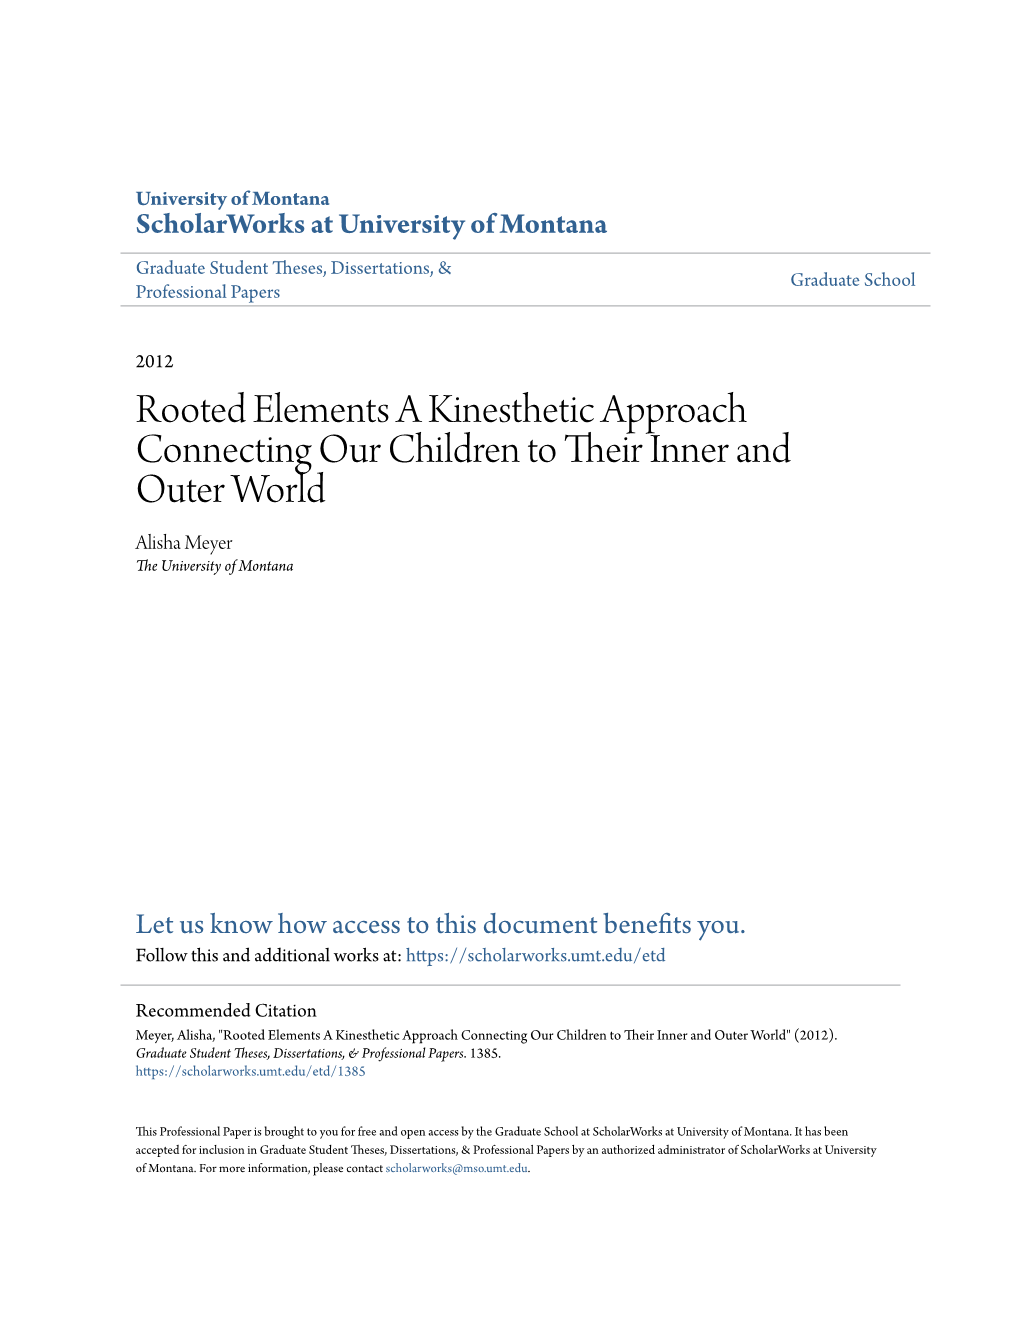 Rooted Elements a Kinesthetic Approach Connecting Our Children to Their Nnei R and Outer World Alisha Meyer the University of Montana